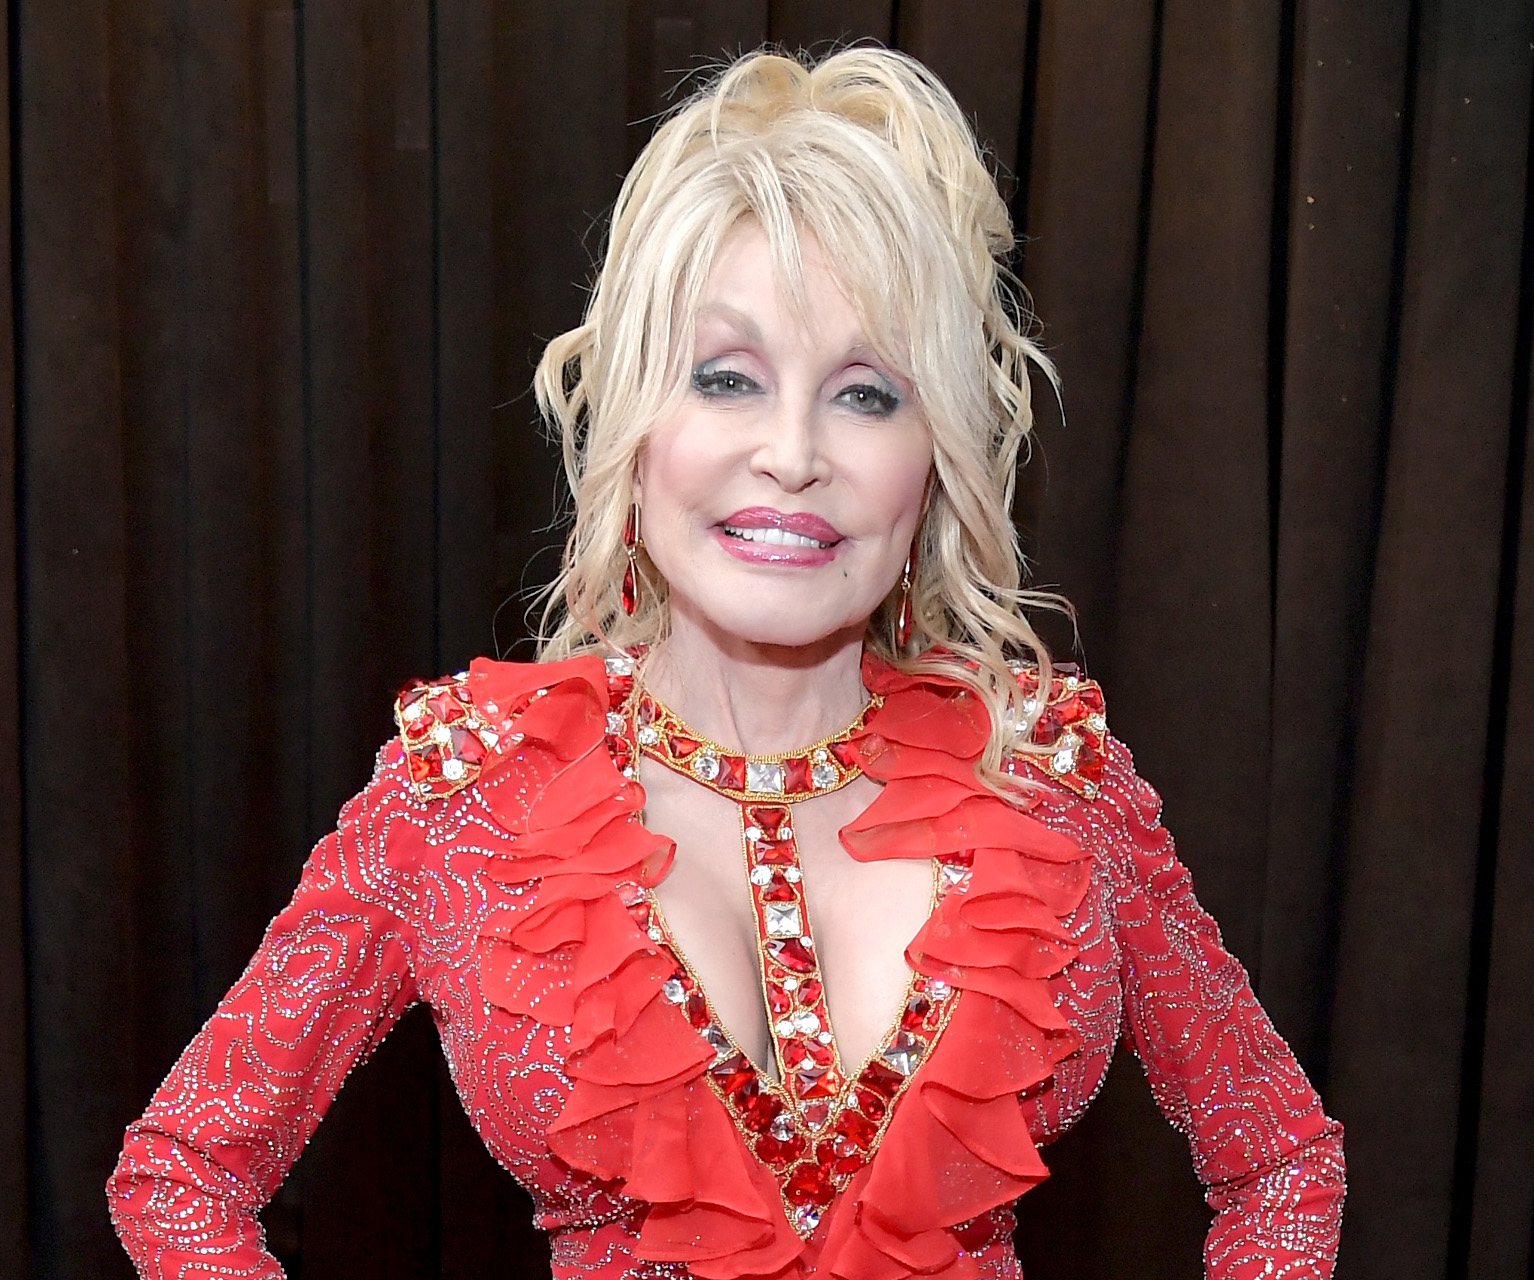 Dolly Parton’s jaw-dropping outfit for the 2019 Grammy Awards red carpet